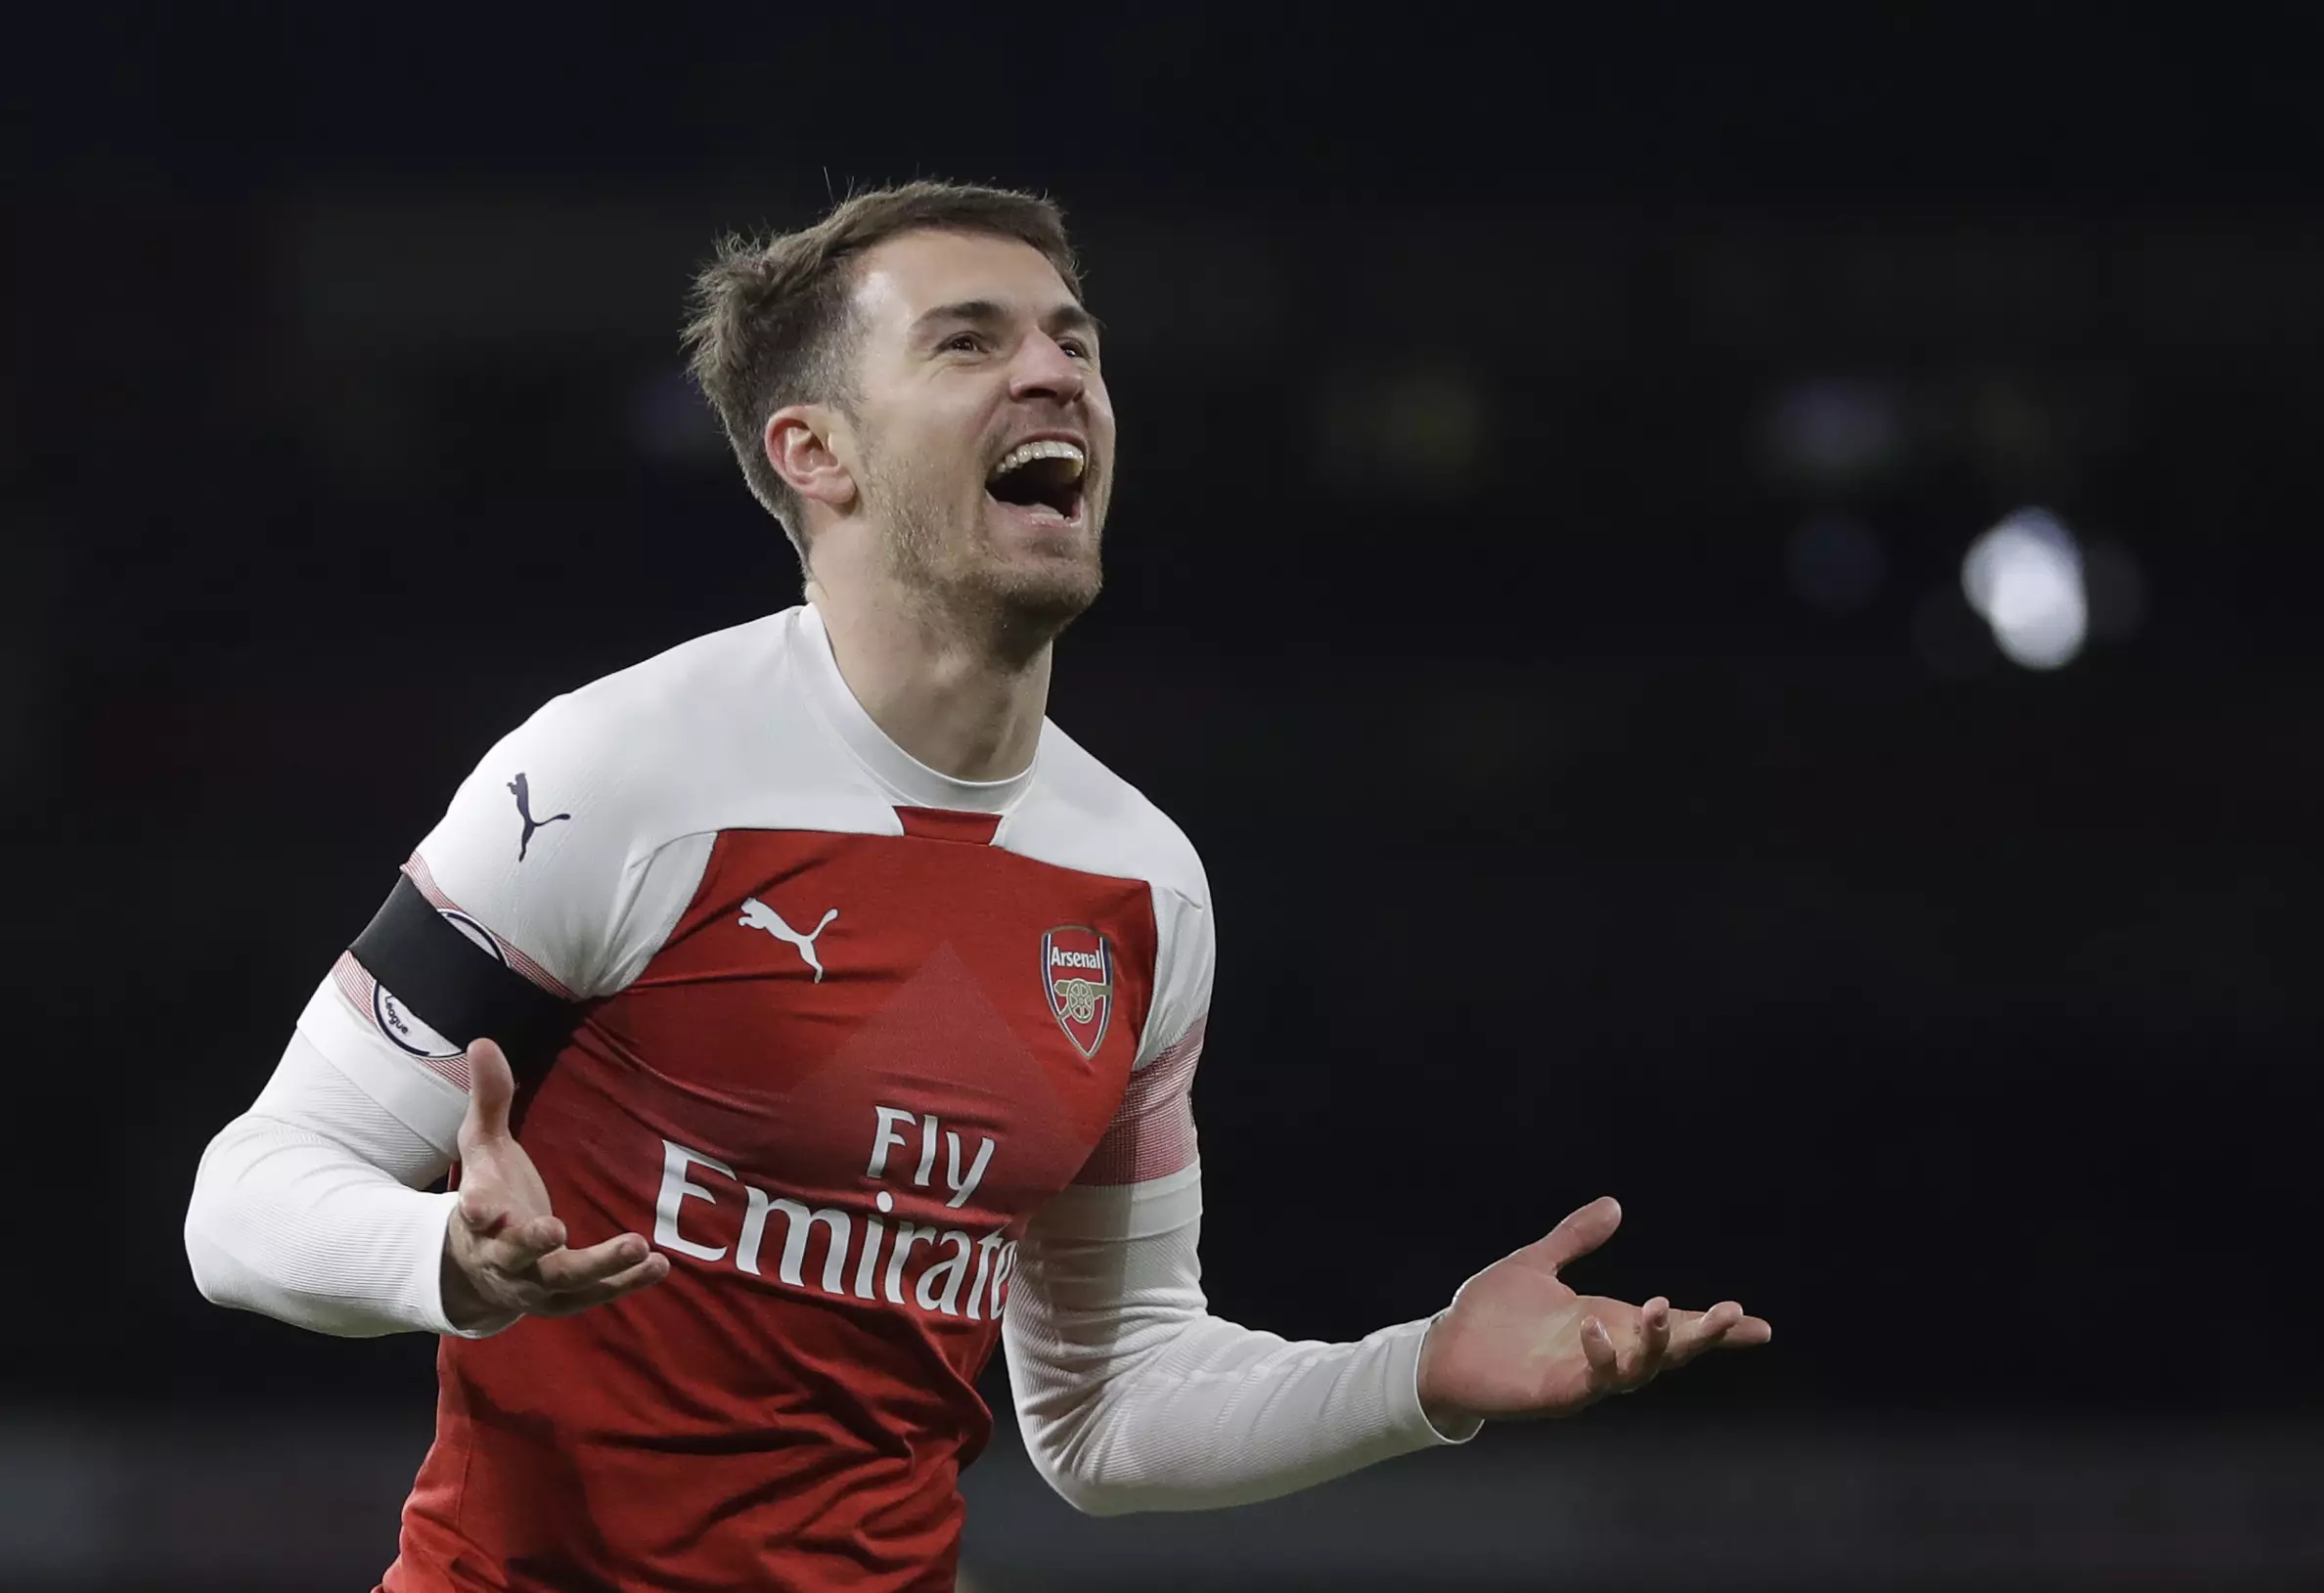 Ramsey will be at the Allianz Arena next season. Image: PA Images